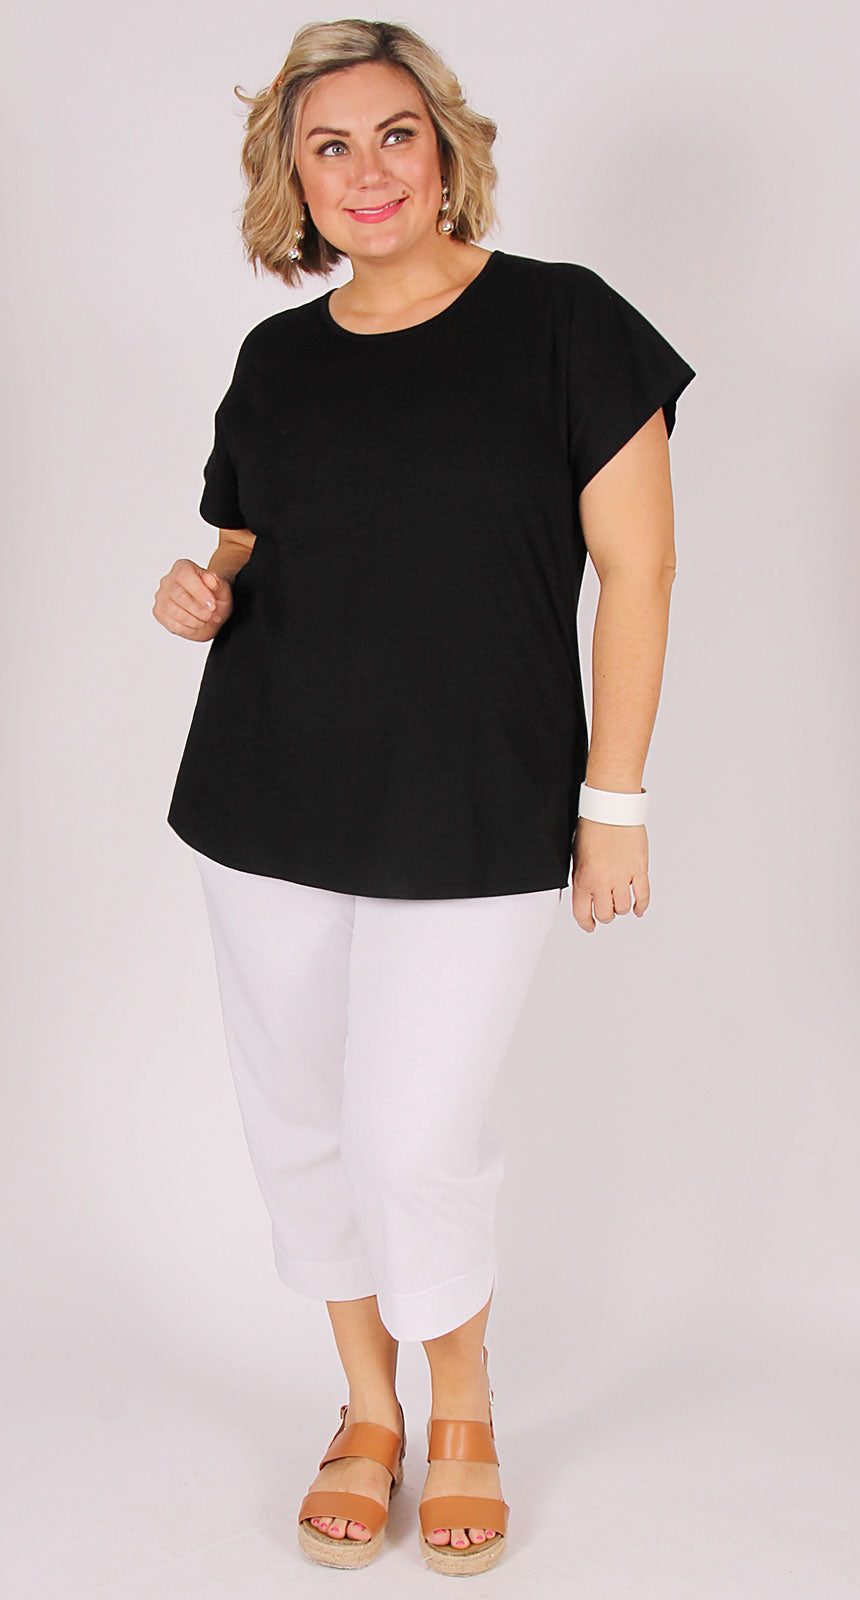 Easy Cotton Shell Top Black